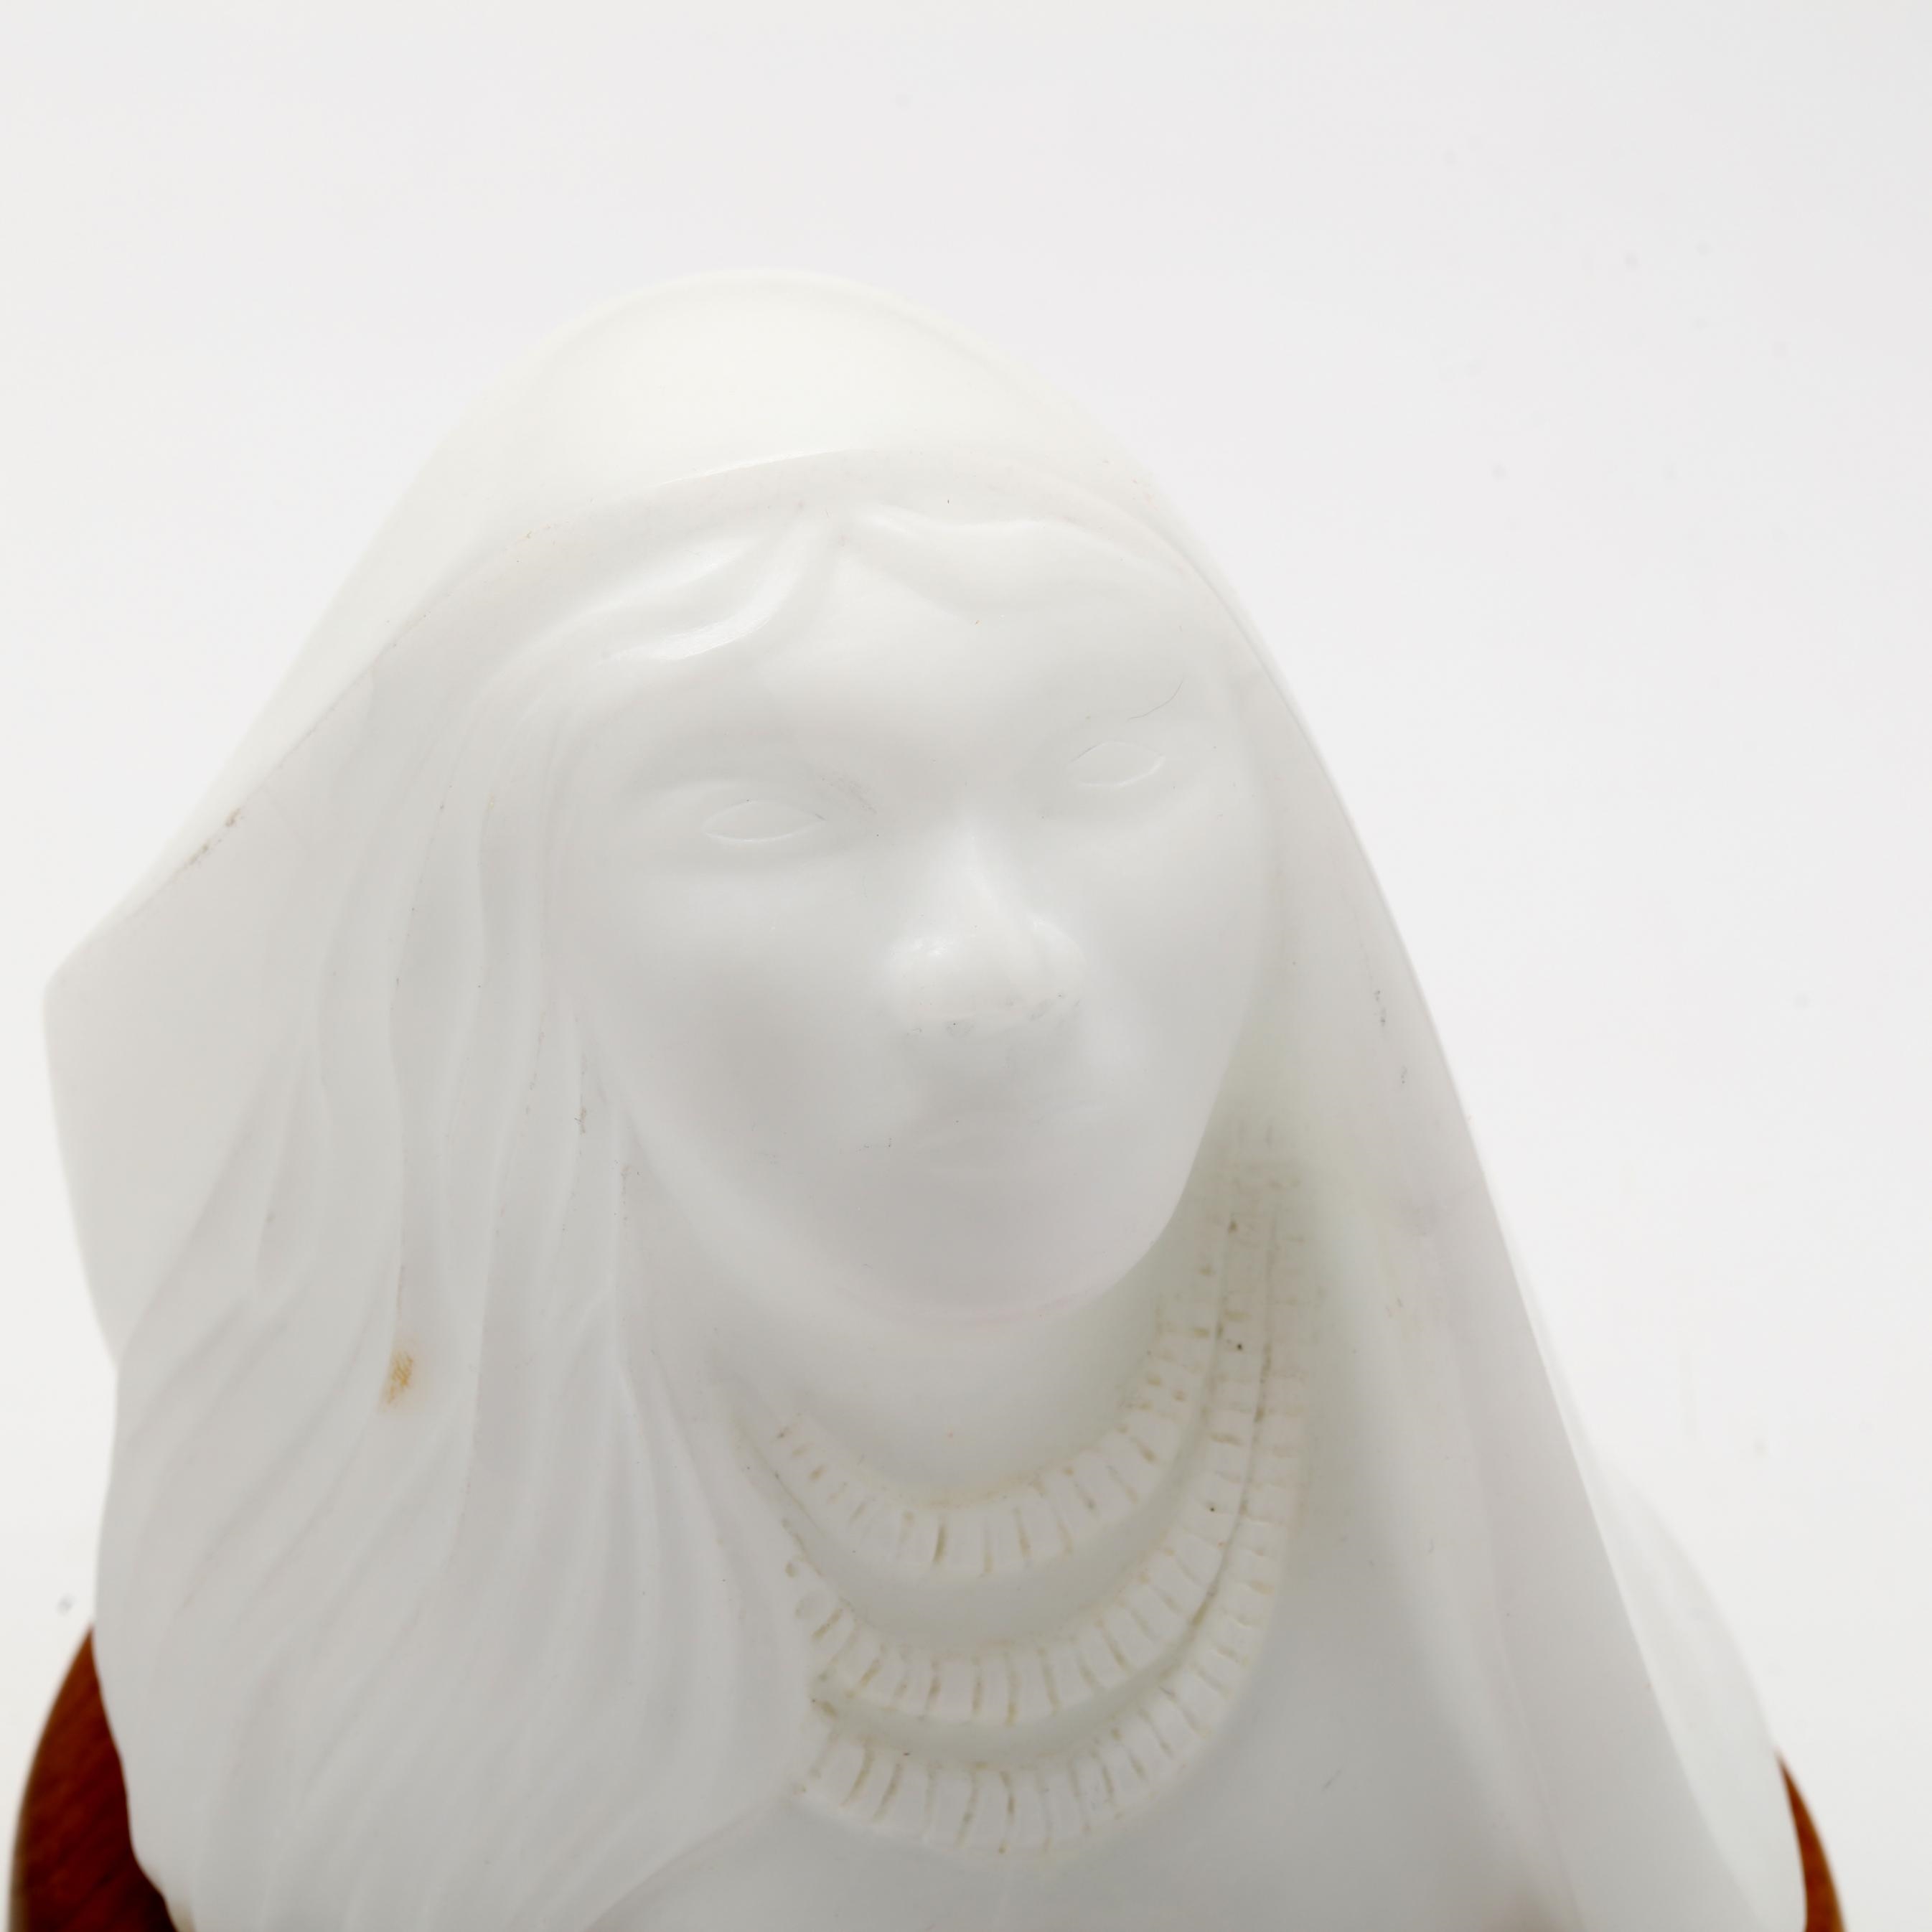 Artwork by Robert Dale Tsosie, Carved Stone Bust, Made of carved and polished white stone